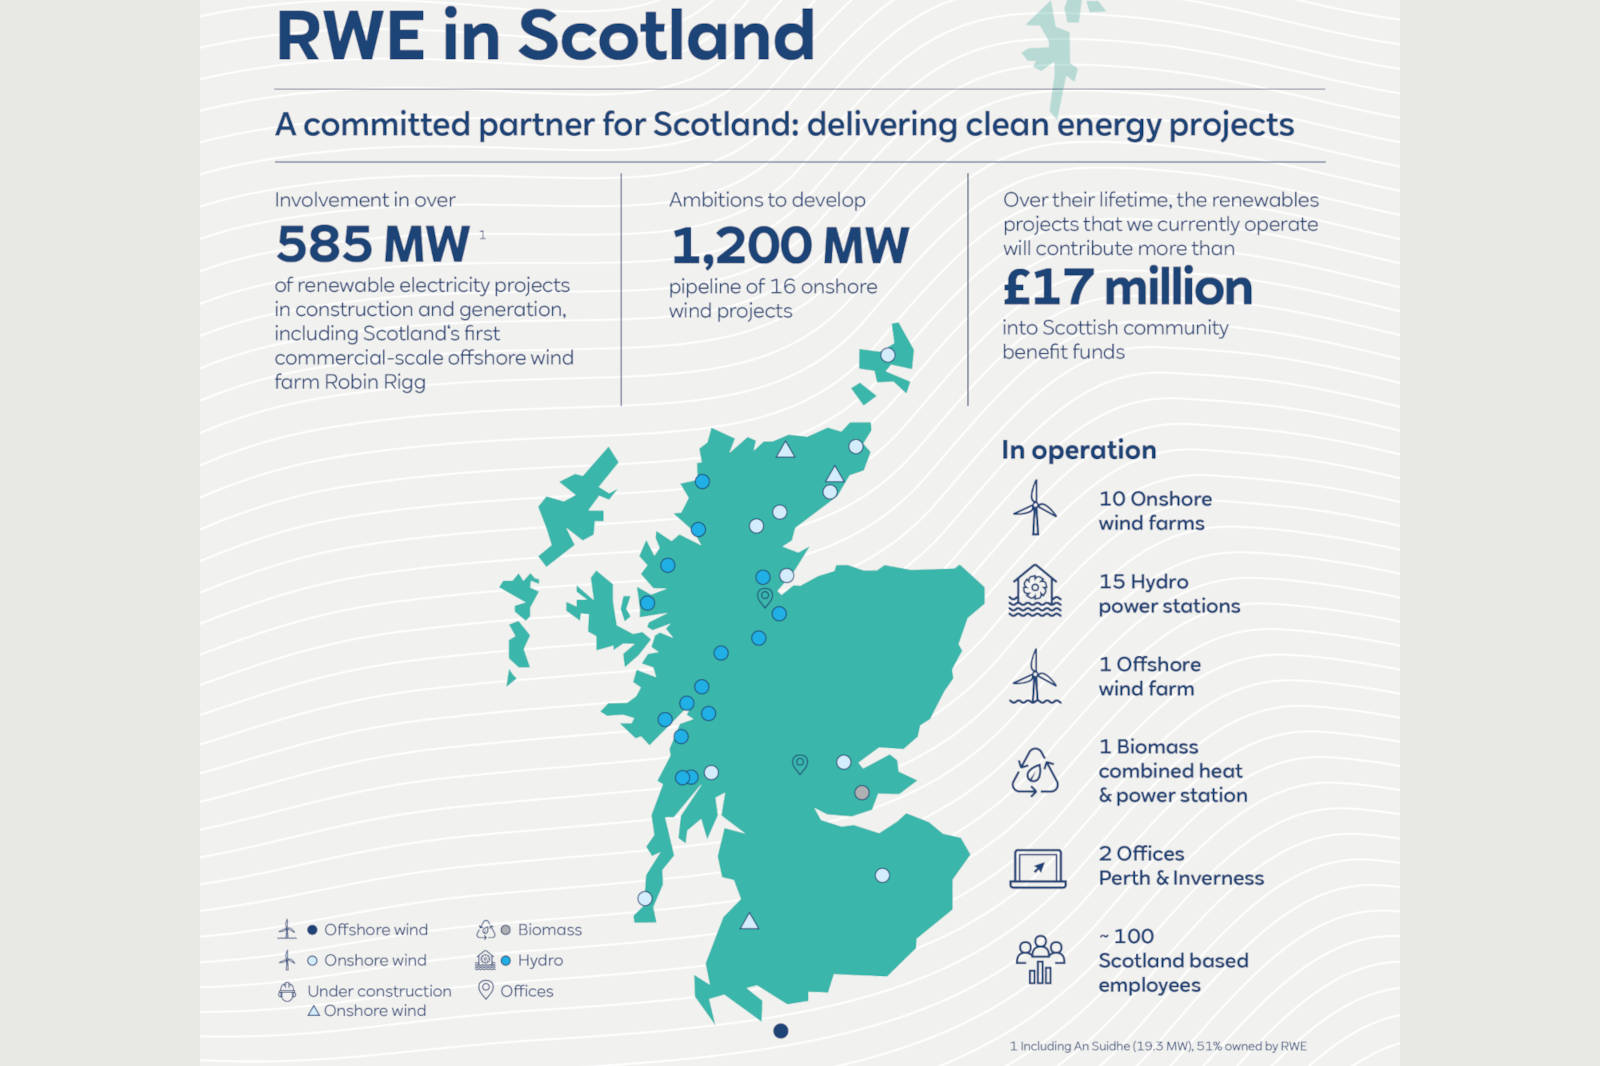 All locations and figures by RWE in Scotland